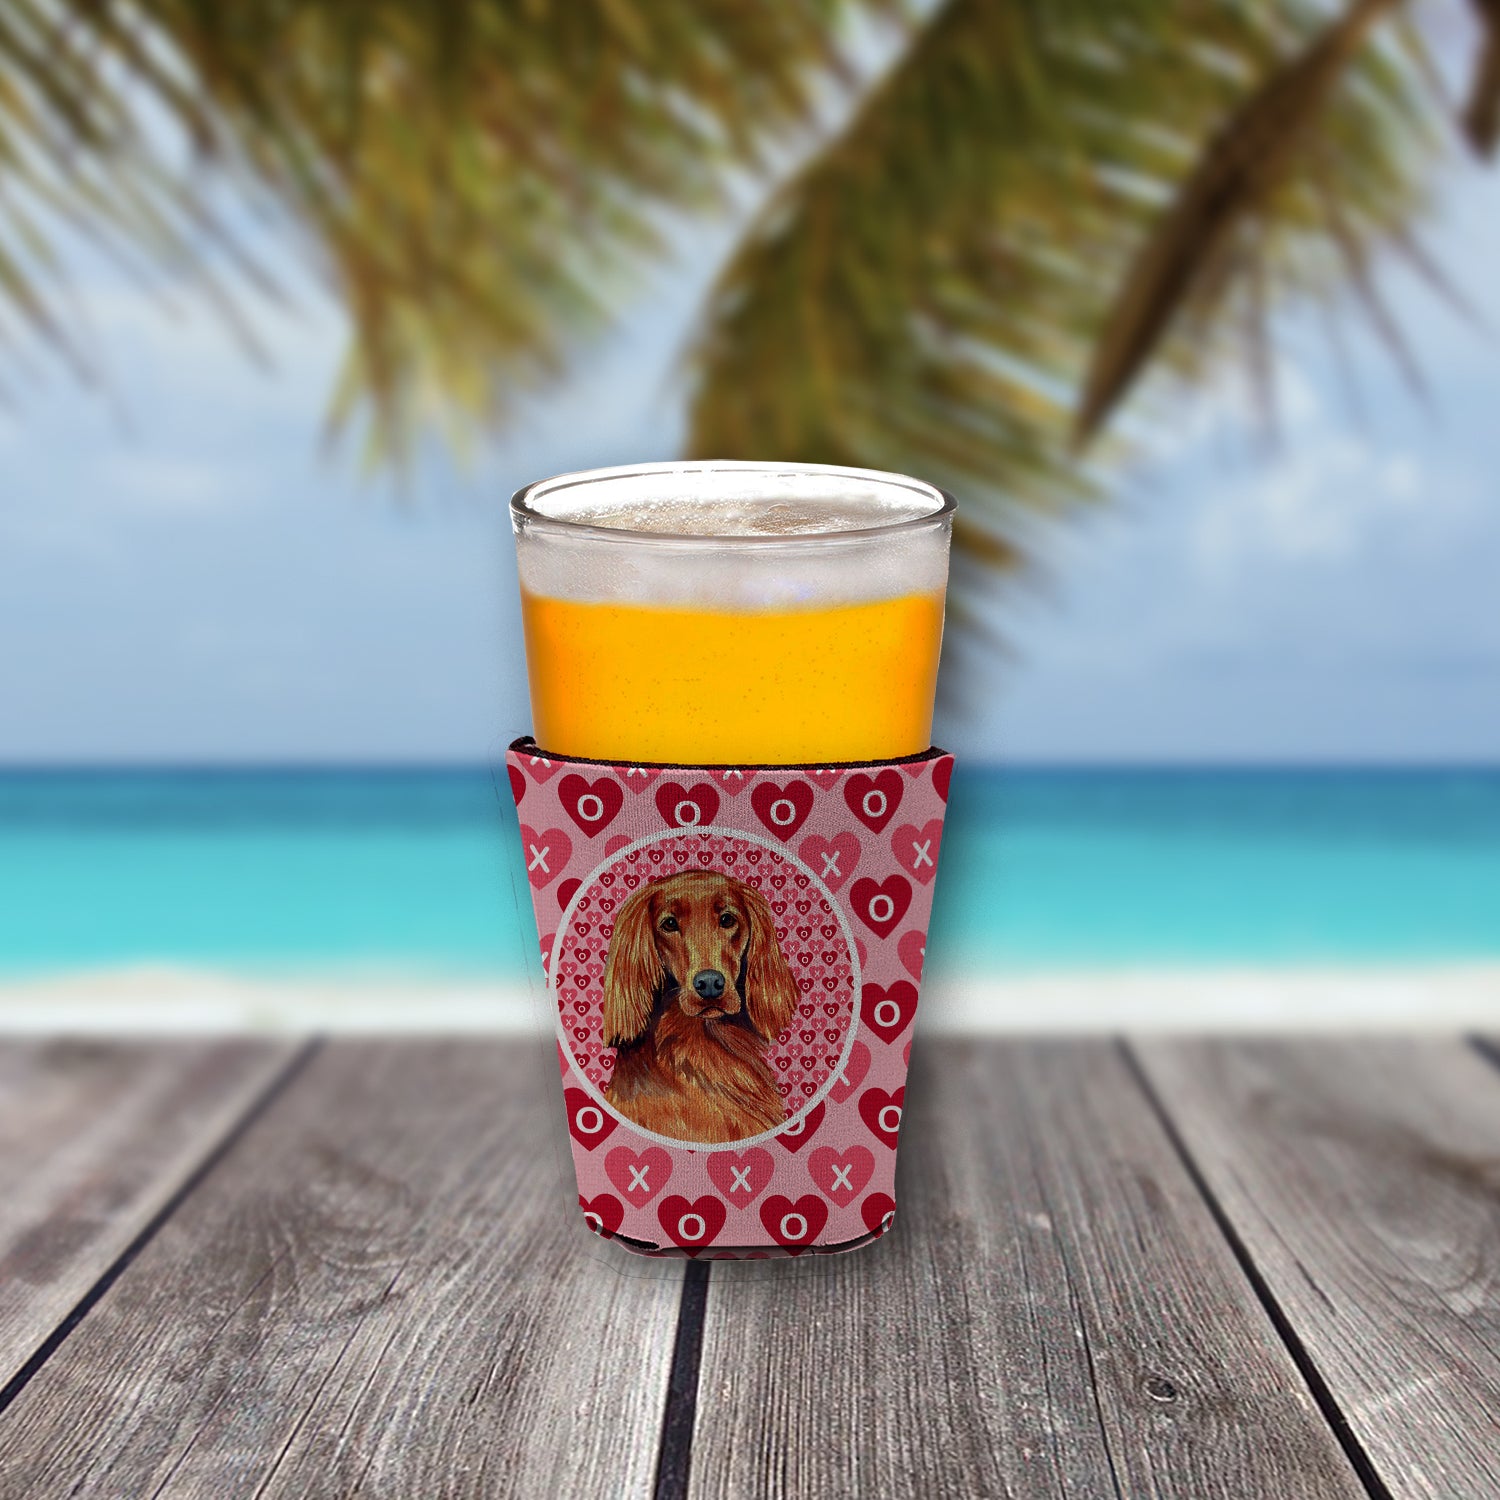 Irish Setter Valentine's Love and Hearts Red Cup Beverage Insulator Hugger  the-store.com.